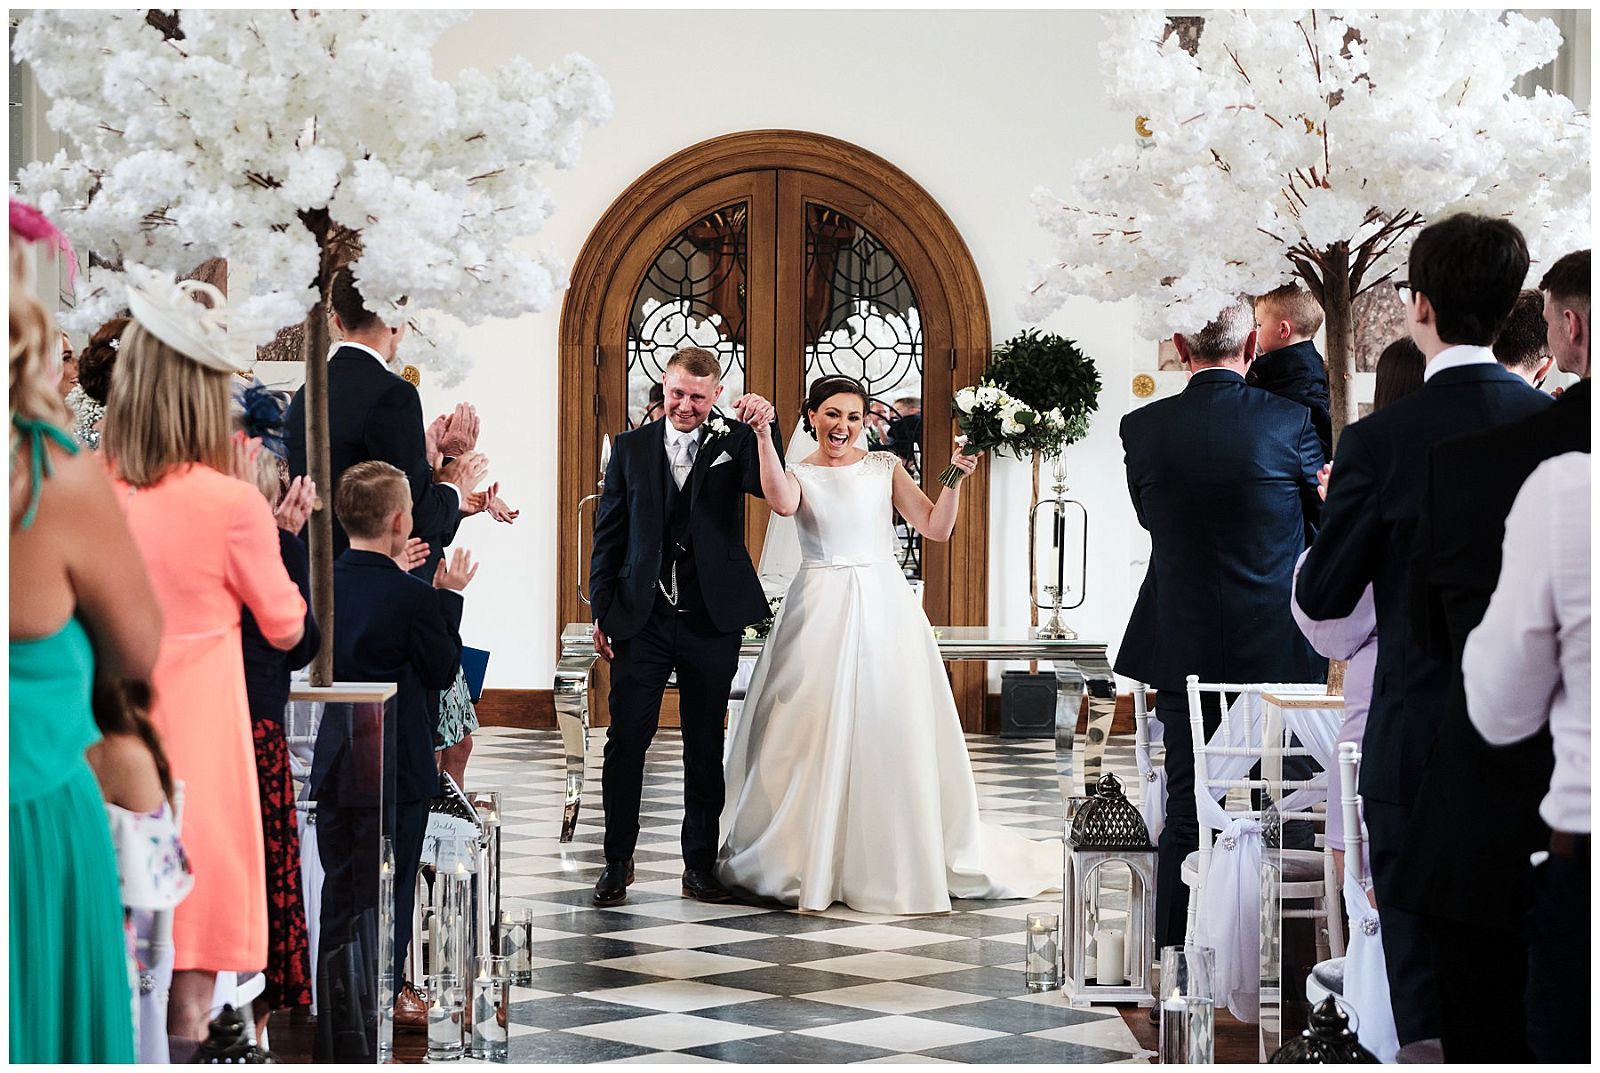 Exiting in style with the best reactions at Hawkstone Hall in Shrewsbury by Documentary Wedding Photographer Stuart James